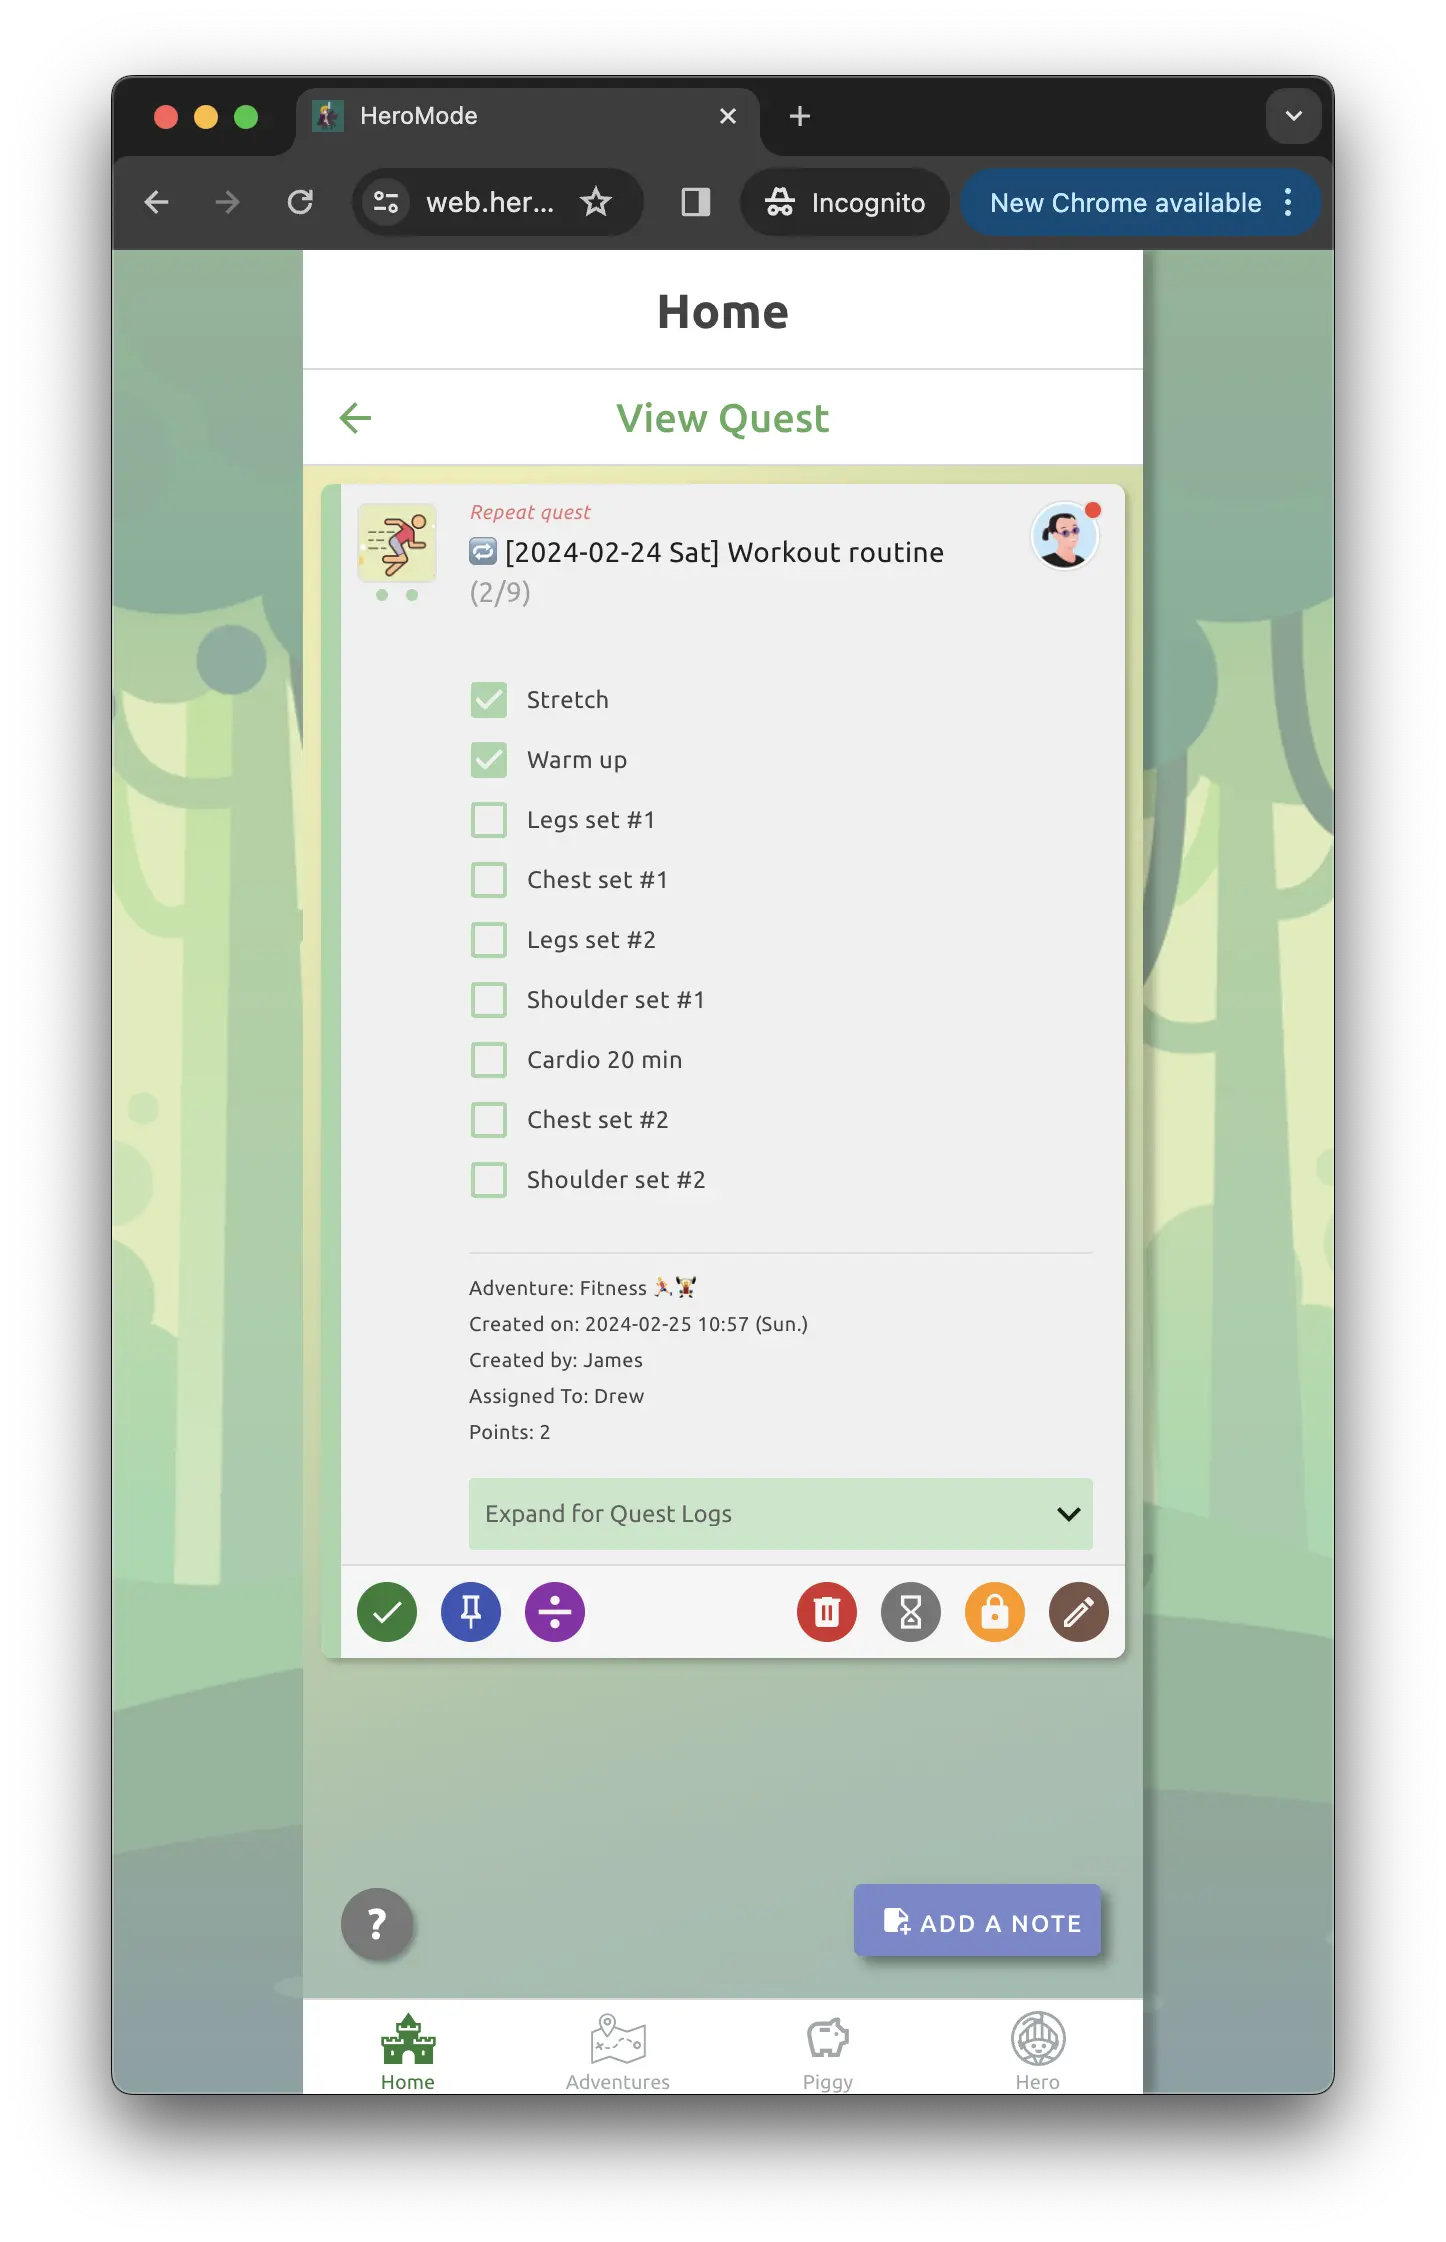 Use quest checkboxes to track workout routines.